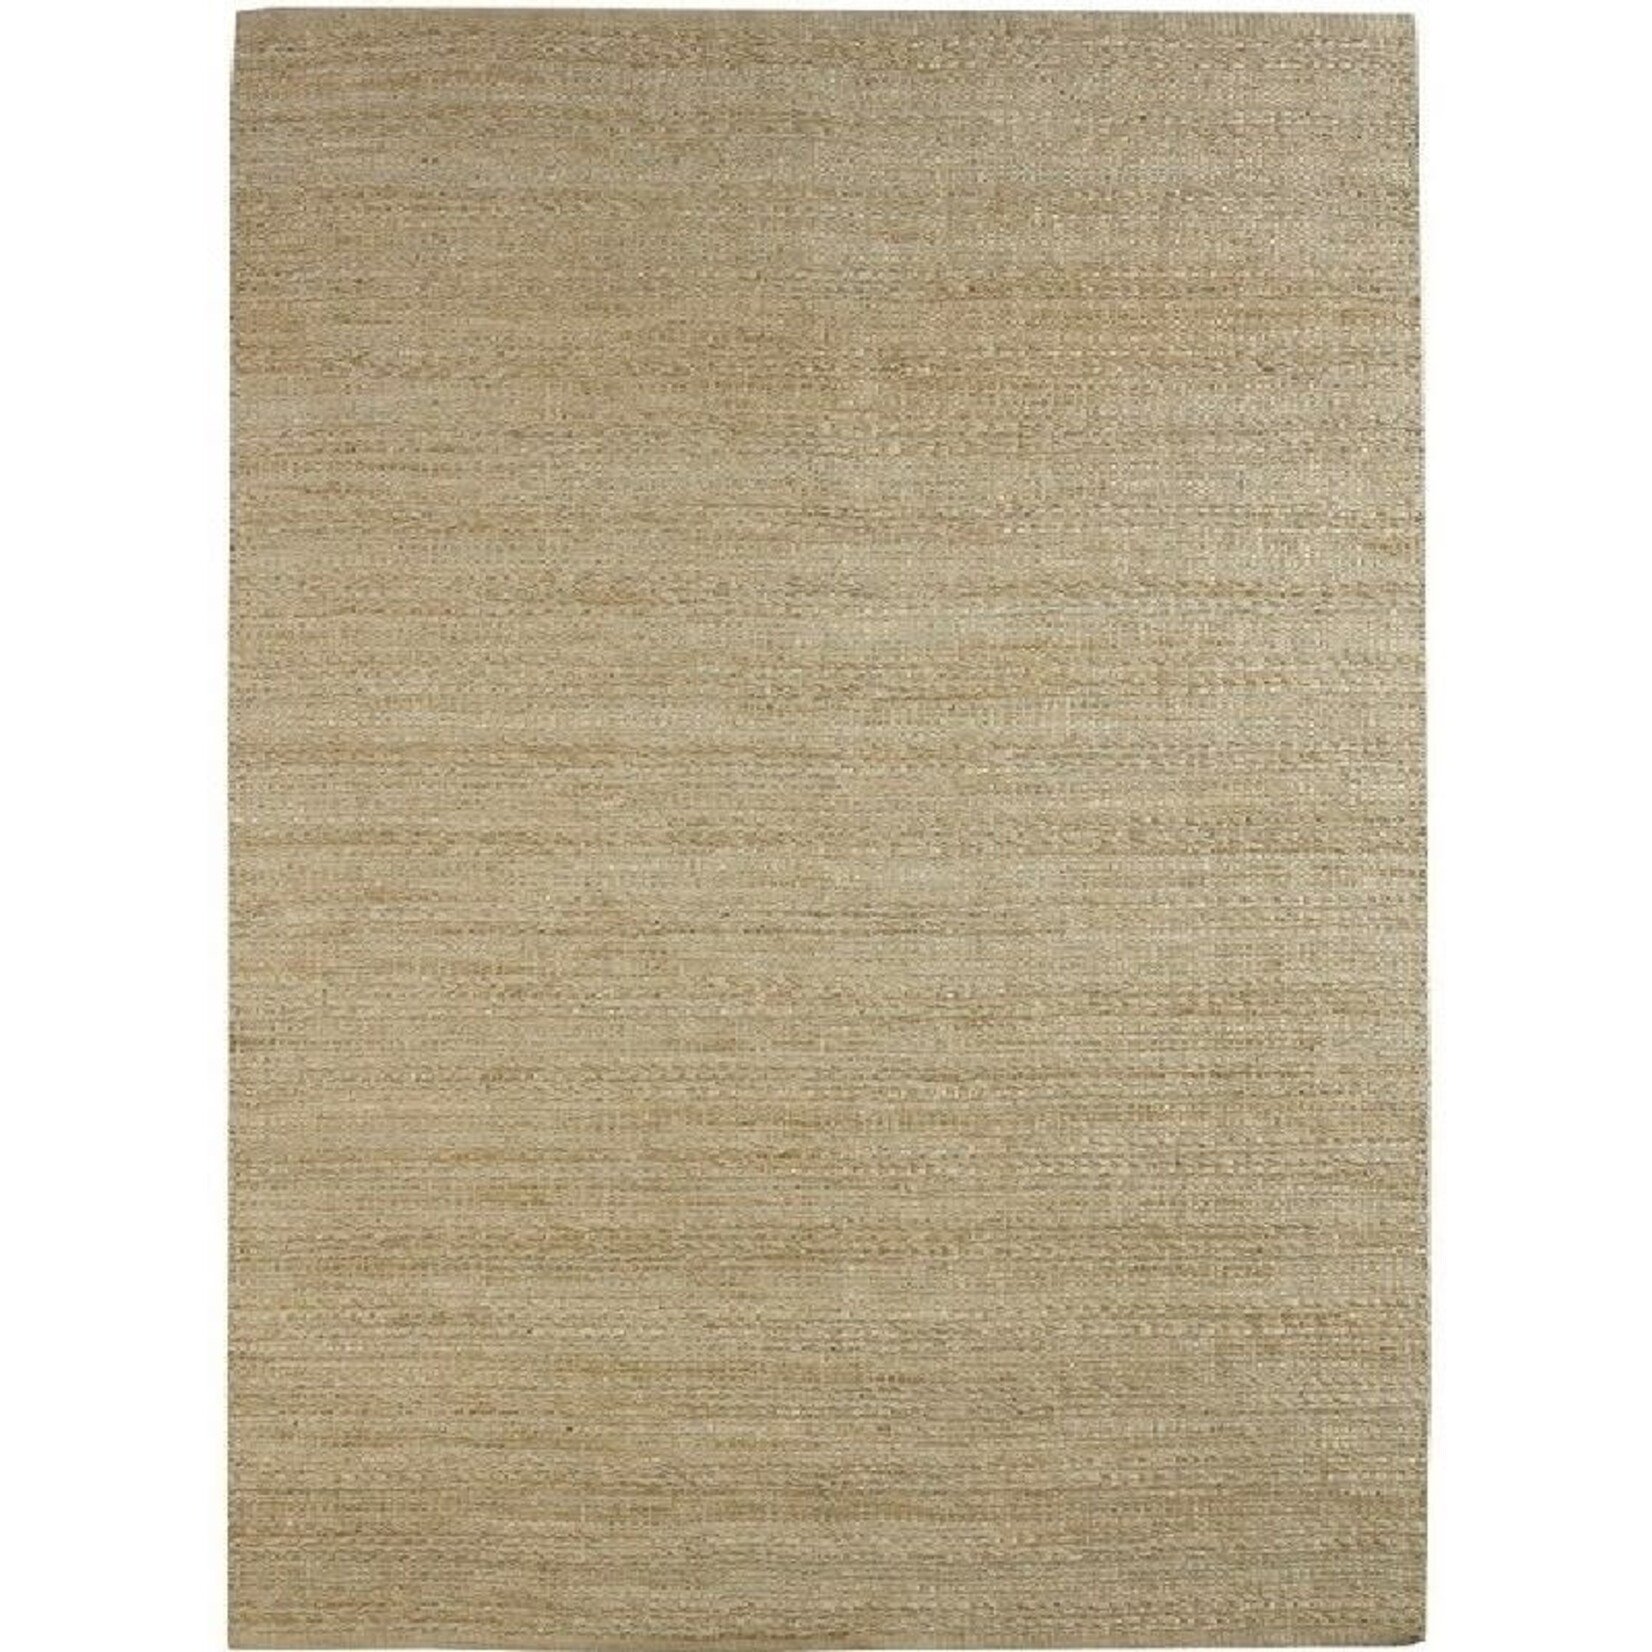 Outside The Box 7' 9" x 9' 9" Natural Fiber 100% Jute & Cotton Back Area Rug In Bleach / Ivory - 03390